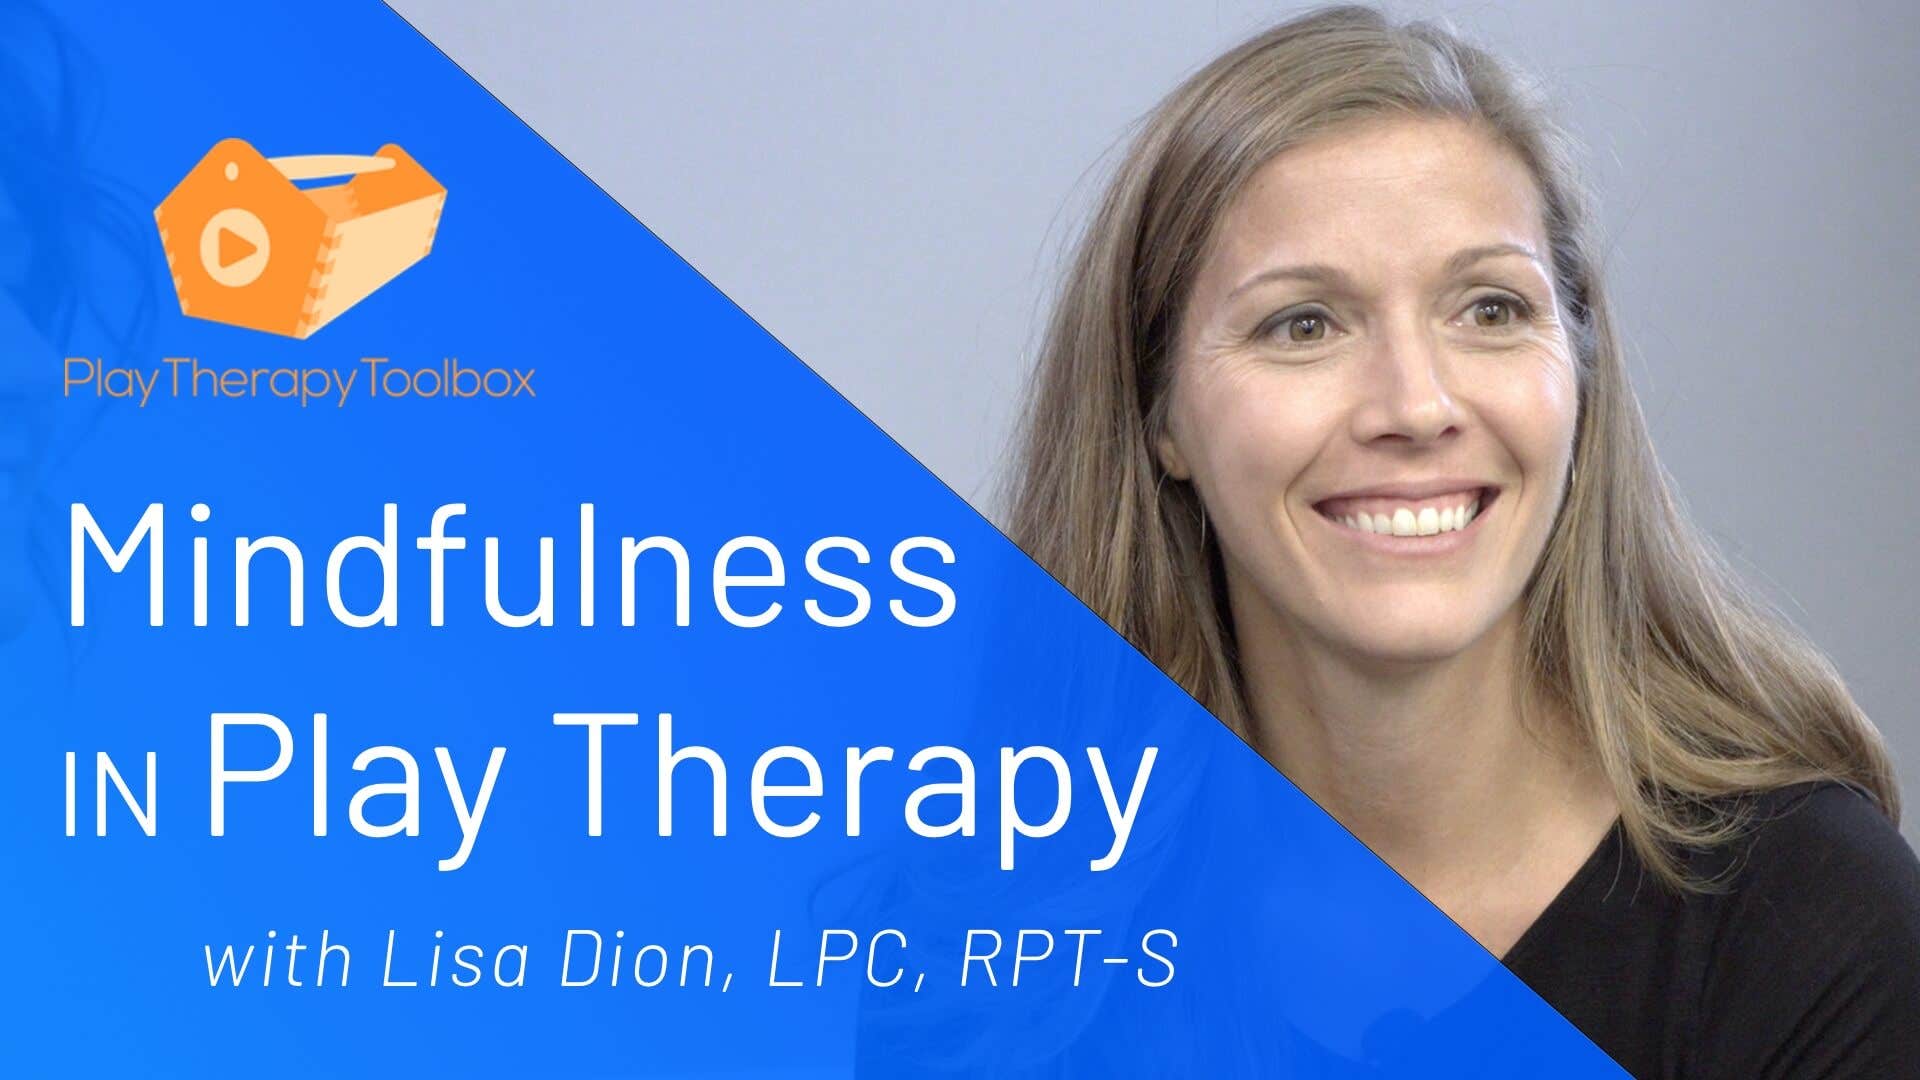 Mindfulness in Play Therapy with Lisa Dion